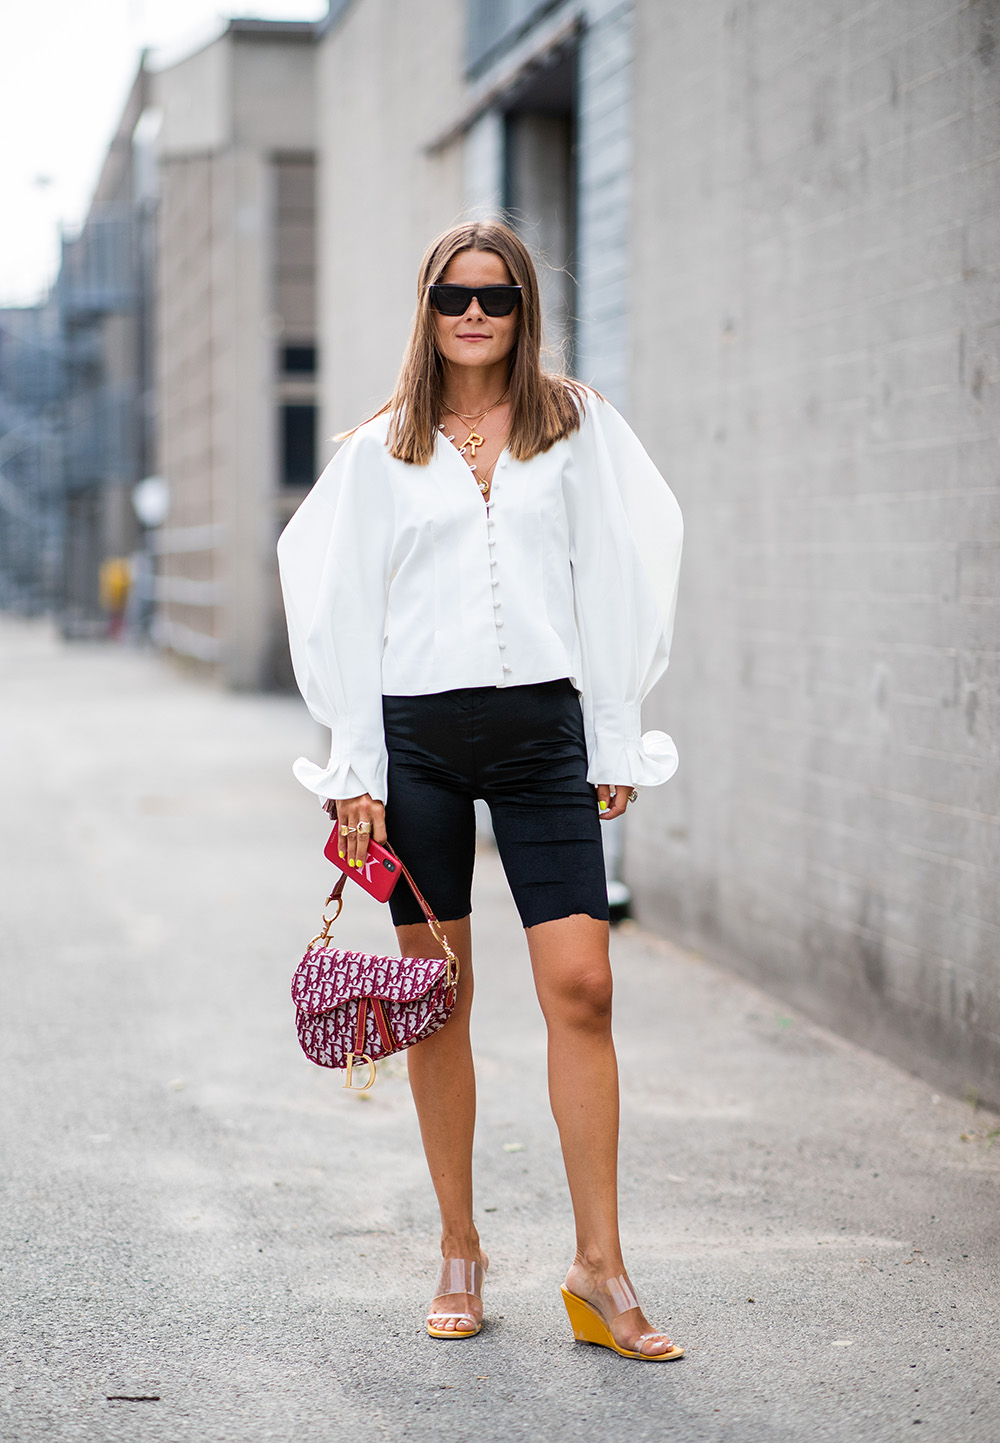 10 ways to wear the bike pant trend outside of the gym | COPENHAGEN, DENMARK - AUGUST 08: A guest wearing white blouse, Dior saddle bag, cycle pants is seen outside J.Lindeberg during the Copenhagen Fashion Week Spring/Summer 2019 on August 8, 2018 in Copenhagen, Denmark. (Photo by Christian Vierig/Getty Images)